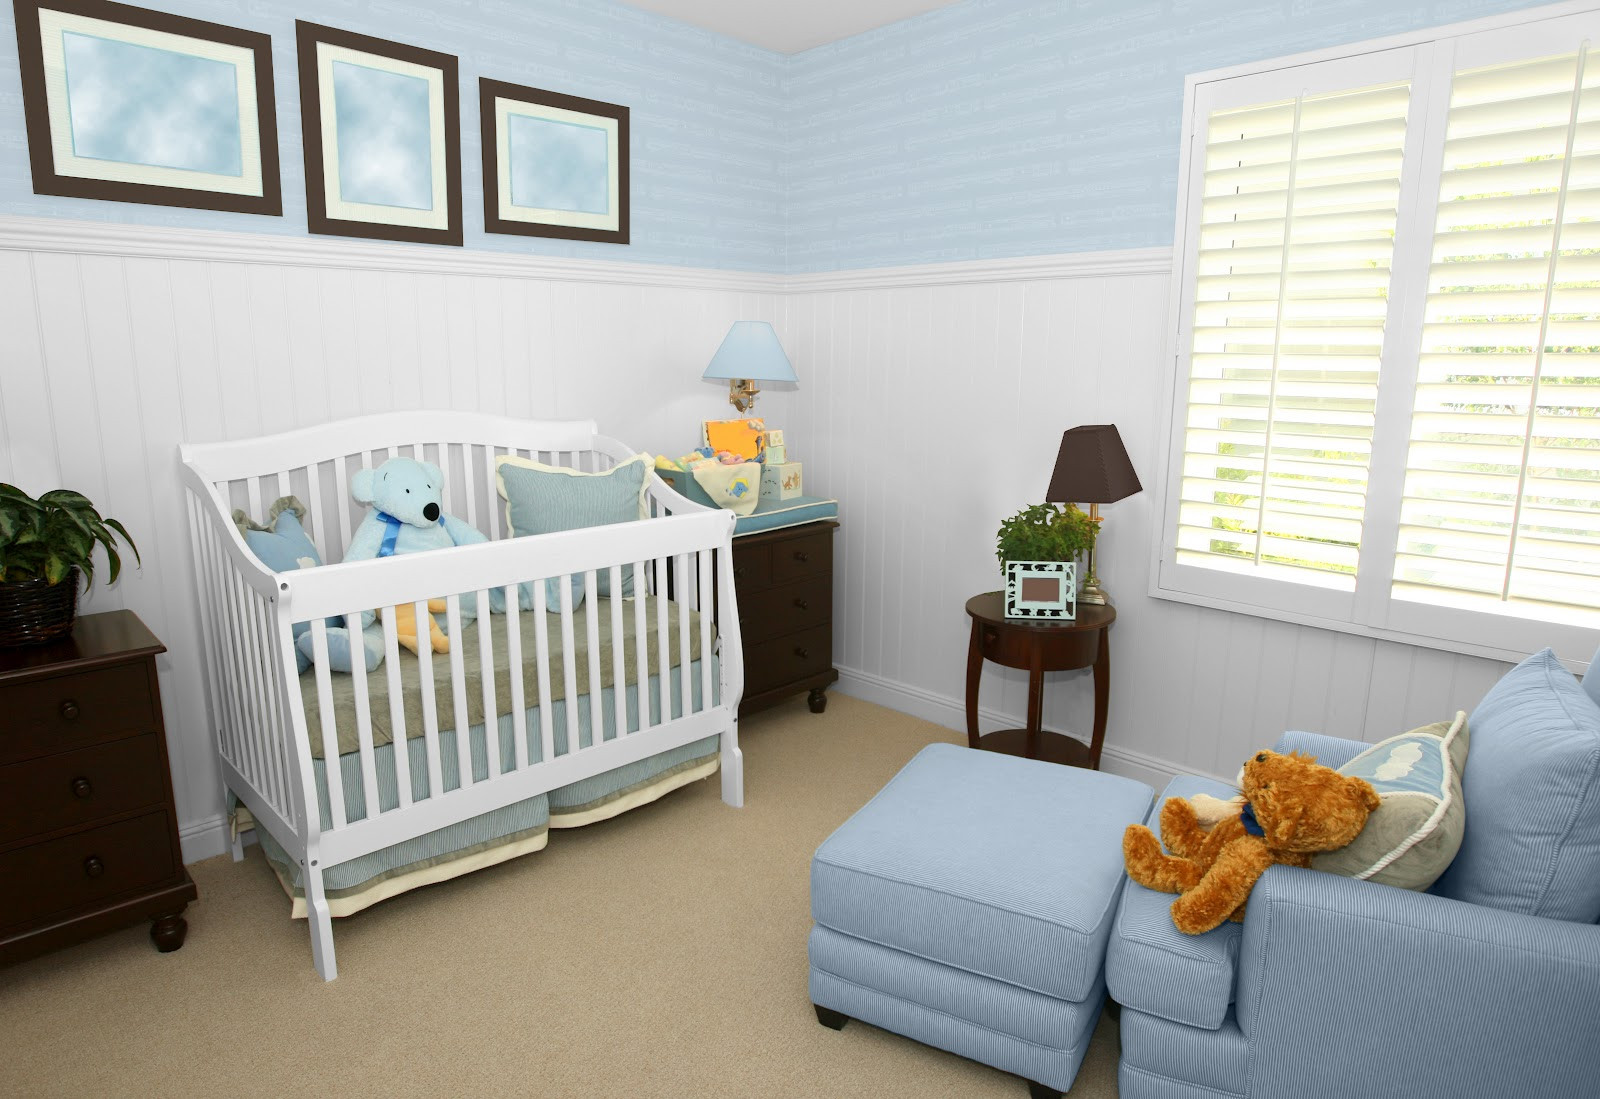 Baby Room Decorations Ideas
 Top 10 Baby Nursery Room Colors And Decorating Ideas